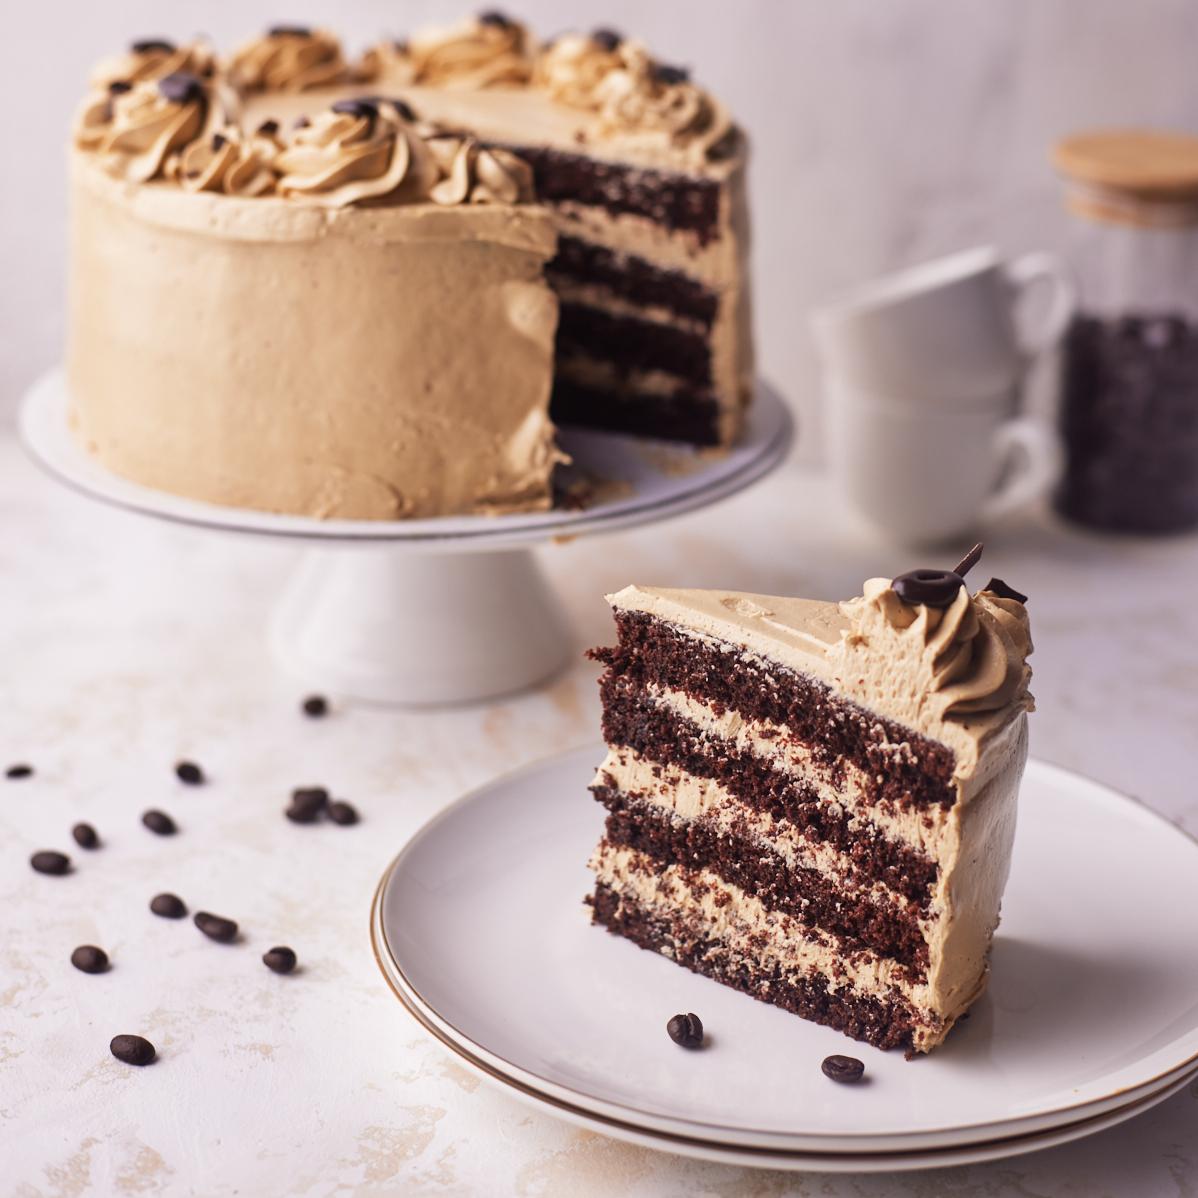  This cake is a coffee lover's paradise